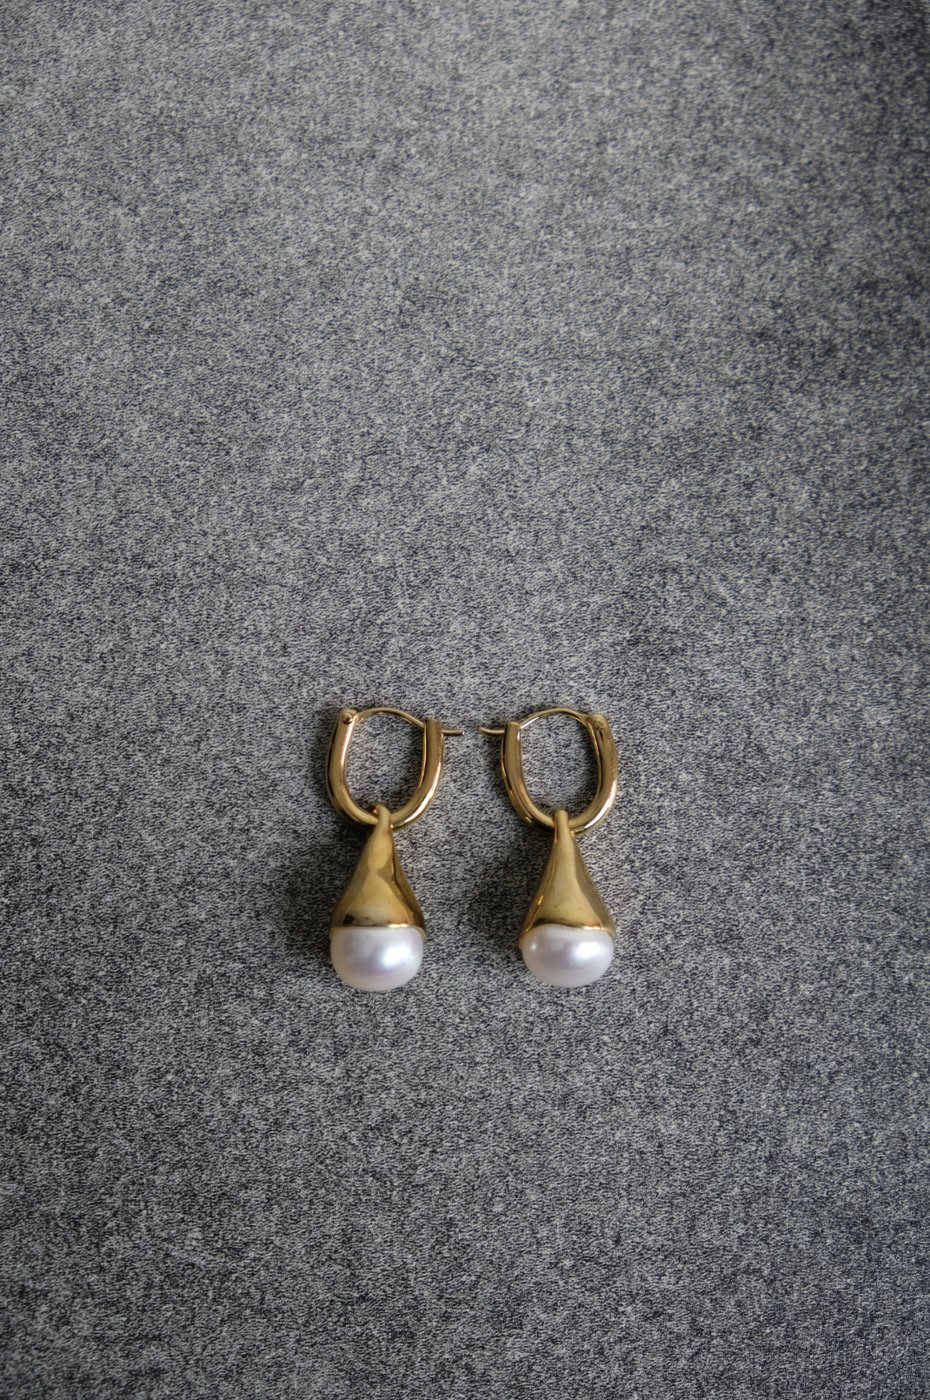 <img class='new_mark_img1' src='https://img.shop-pro.jp/img/new/icons56.gif' style='border:none;display:inline;margin:0px;padding:0px;width:auto;' />R.ALAGAN 饬-TENTO EARRINGS-GOLD